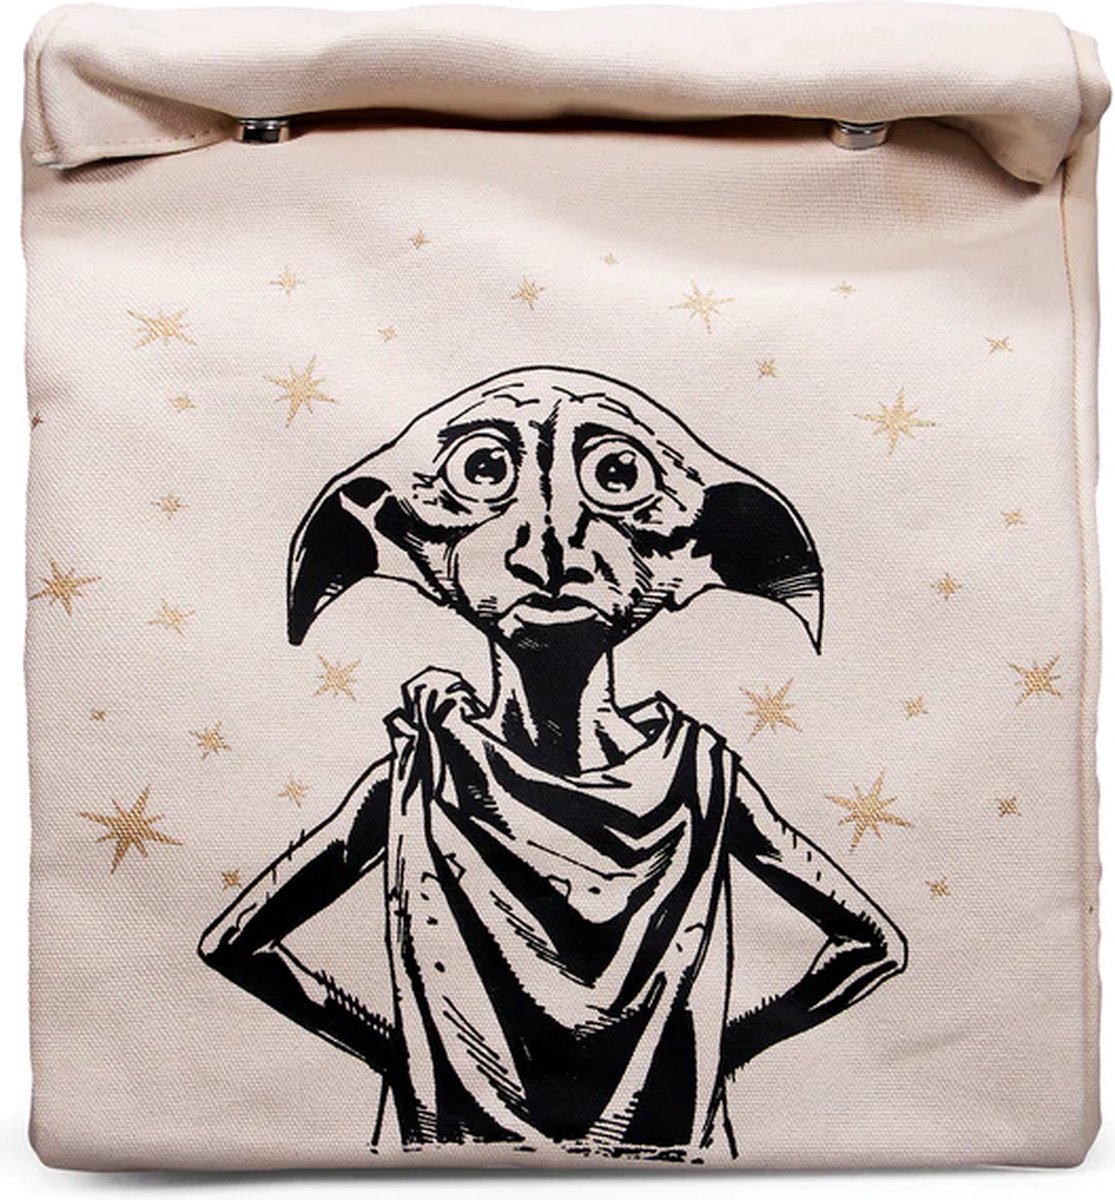 HARRY POTTER - Lunch Bag 'Textile' - Dobby